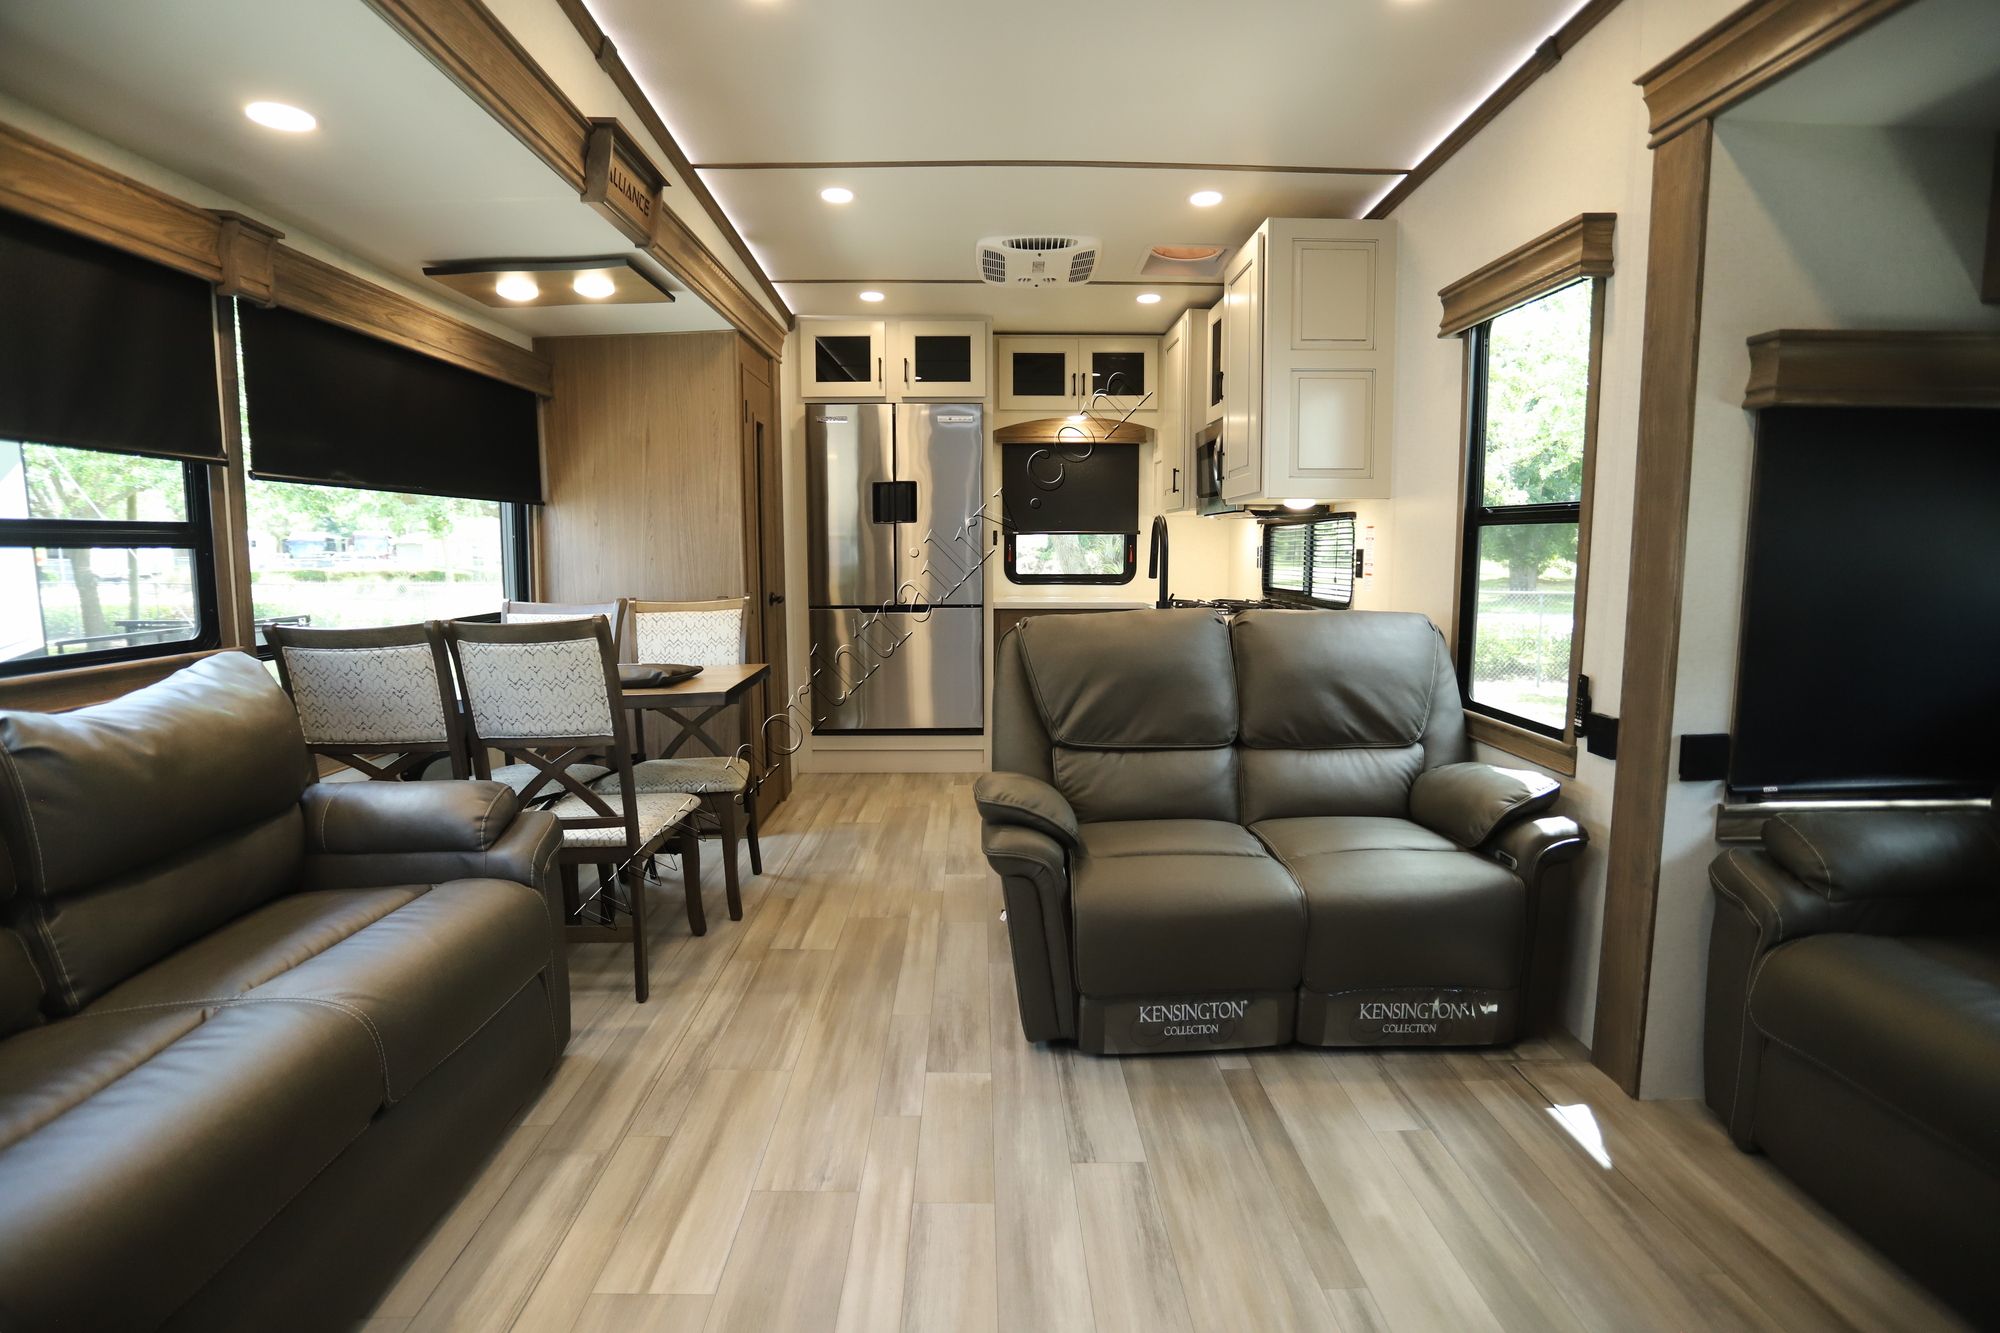 Used 2023 Alliance Paradigm 382RK Fifth Wheel  For Sale